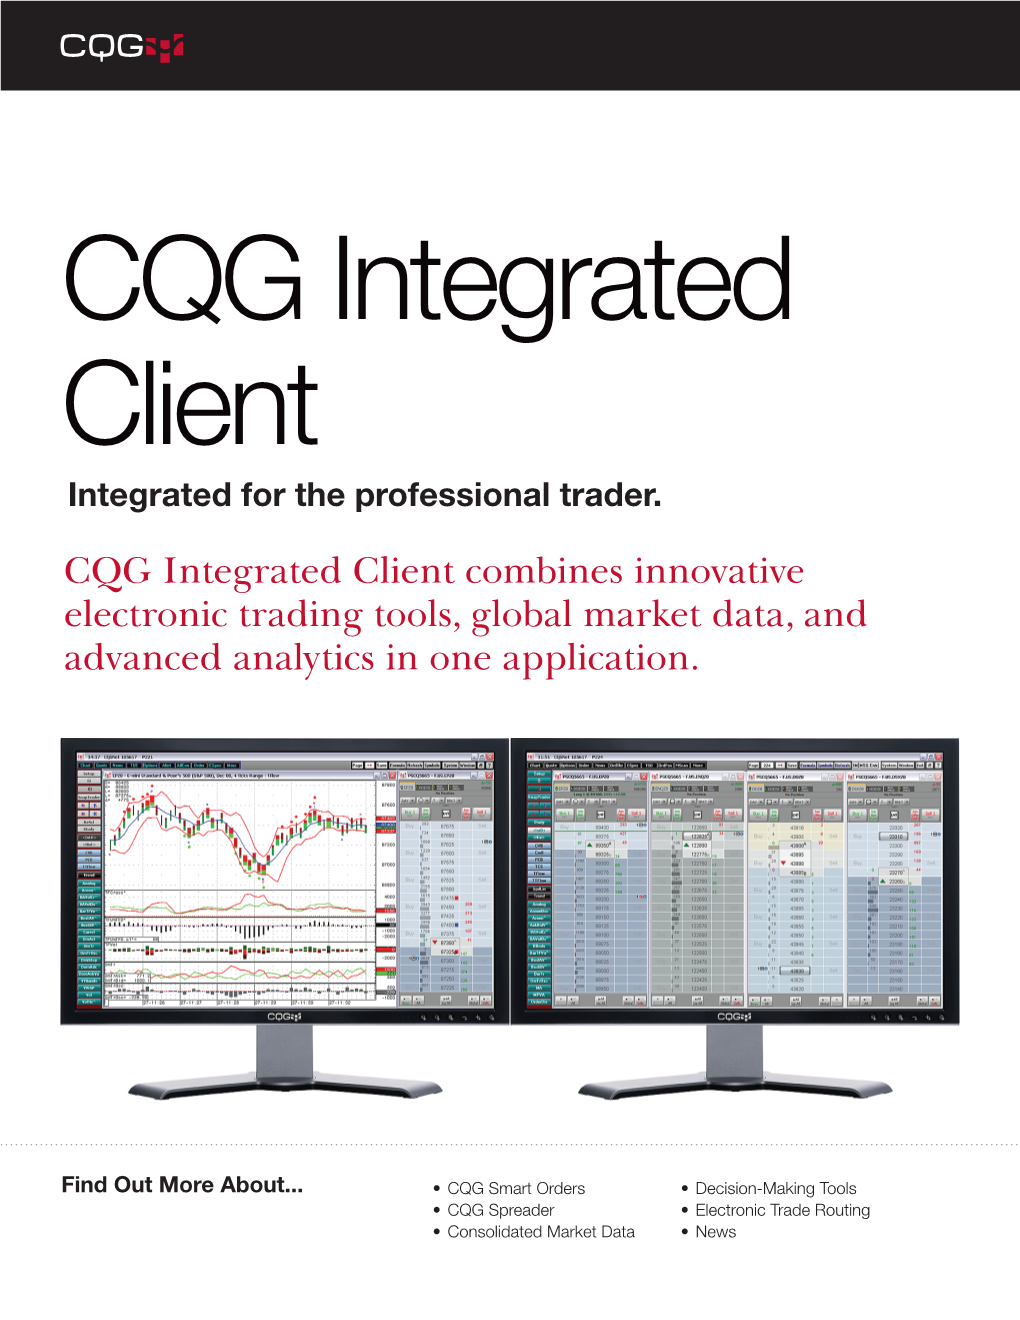 CQG Integrated Client Combines Innovative Electronic Trading Tools, Global Market Data, and Advanced Analytics in One Application